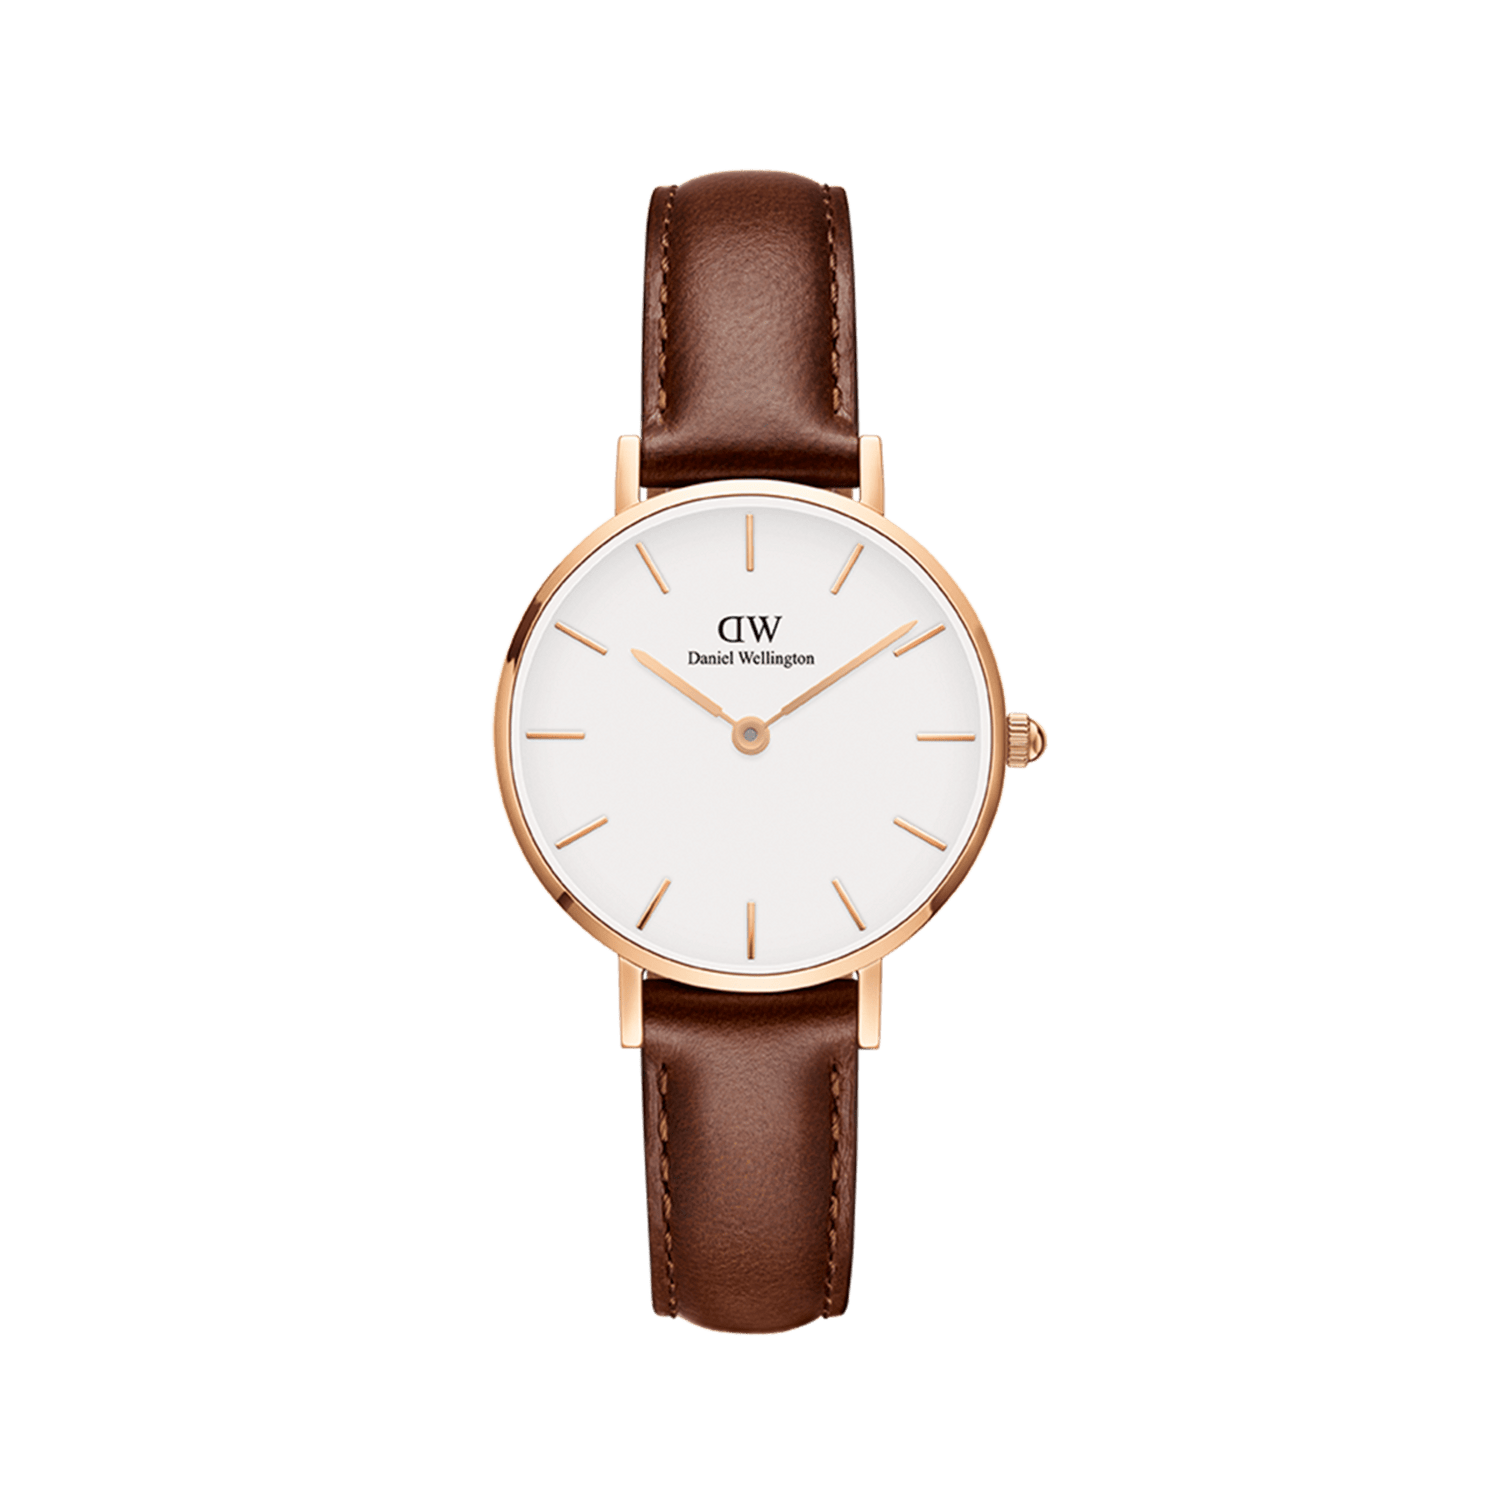 Petite St Mawes - Women's Rose Gold & White Watch 32mm | DW 